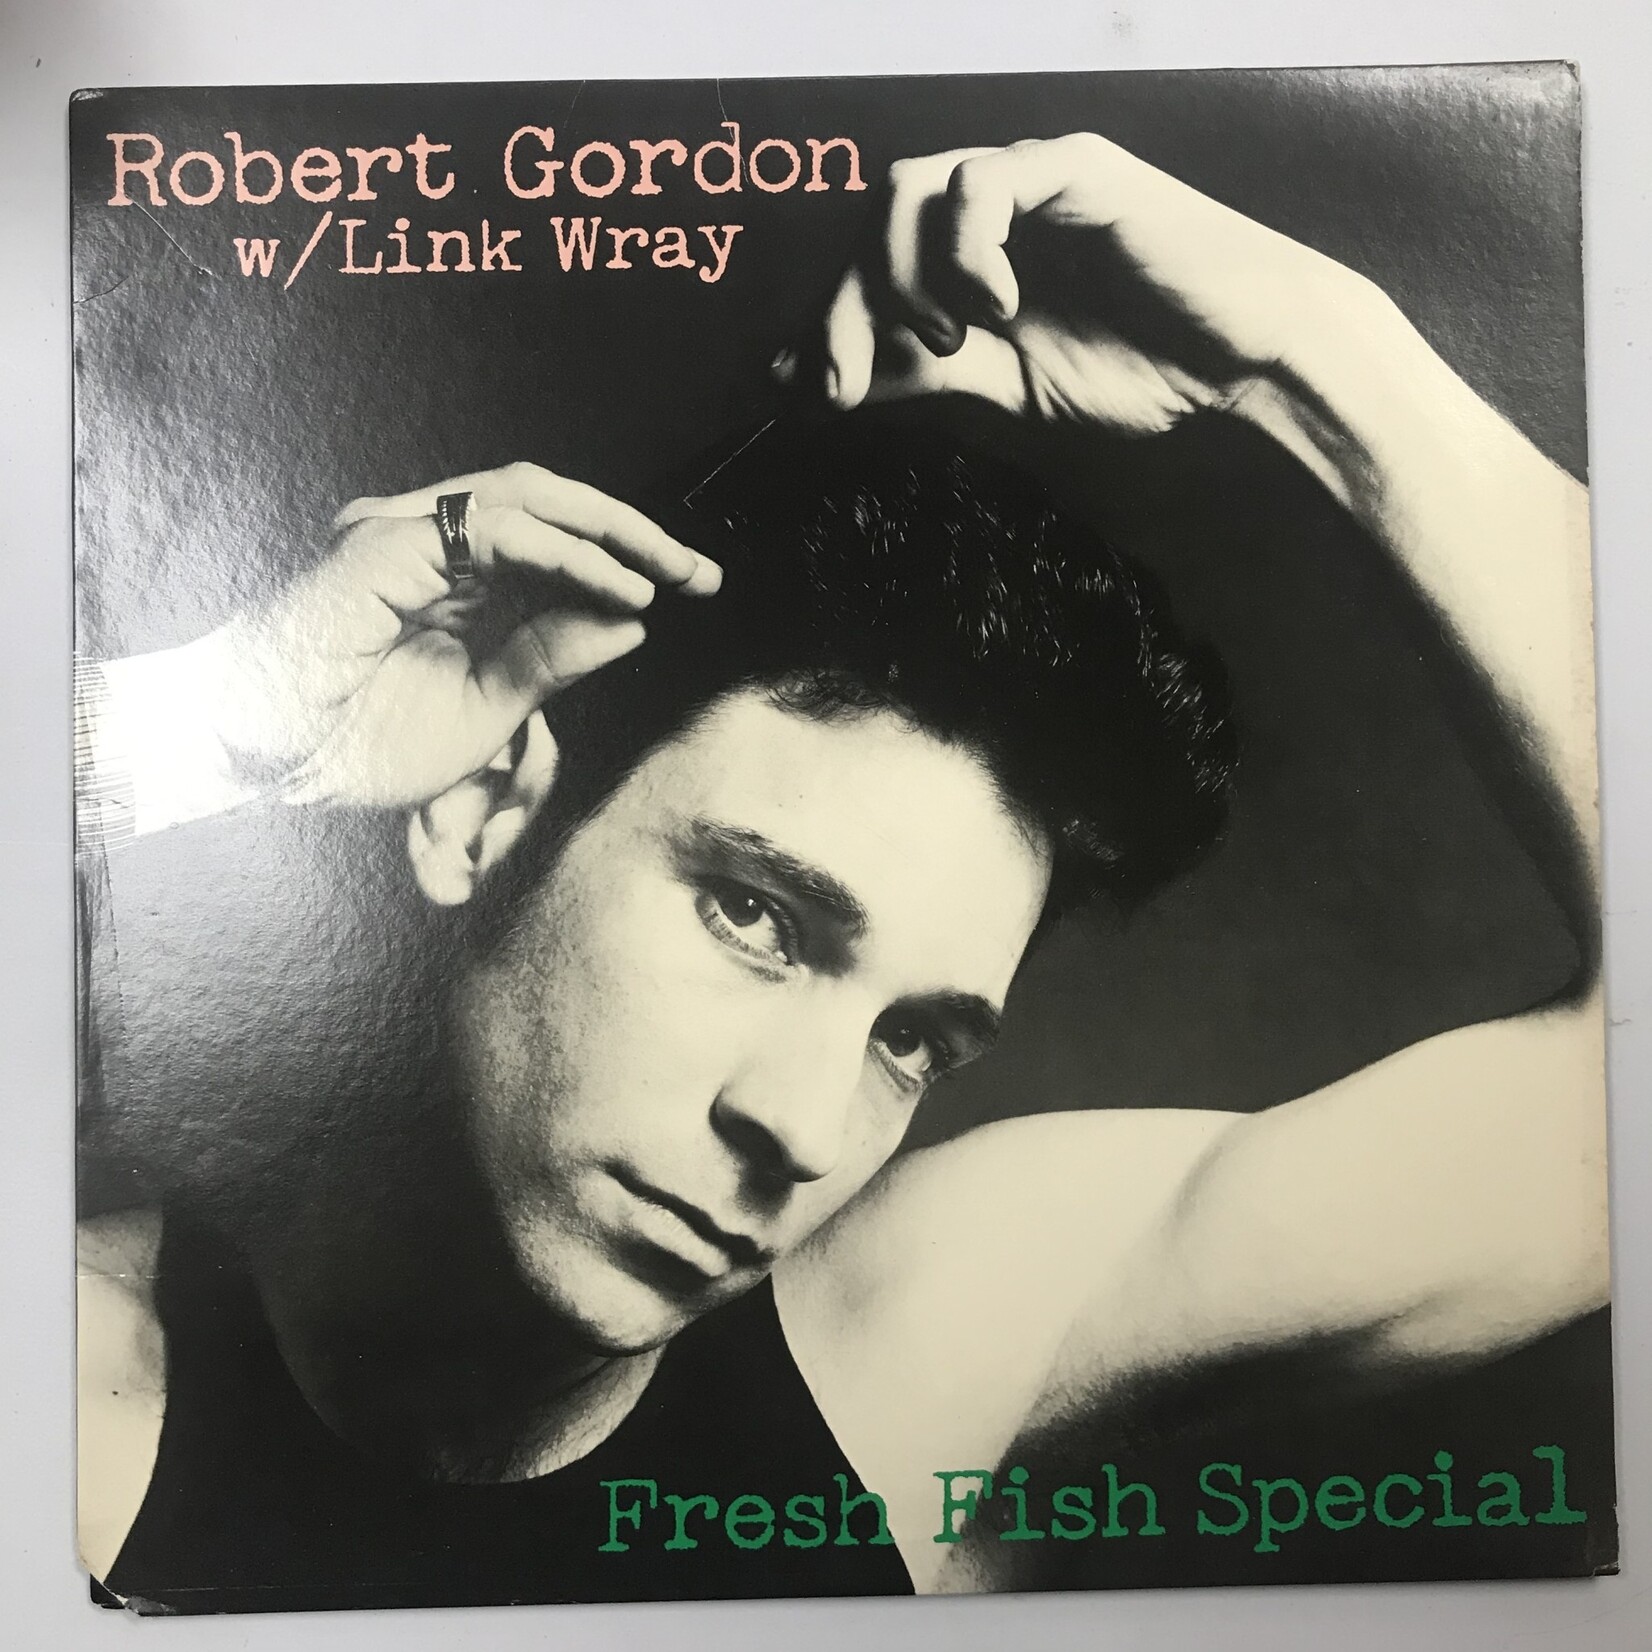 Robert Gordon with Link Wray - Fresh Fish Special - Vinyl LP (USED)